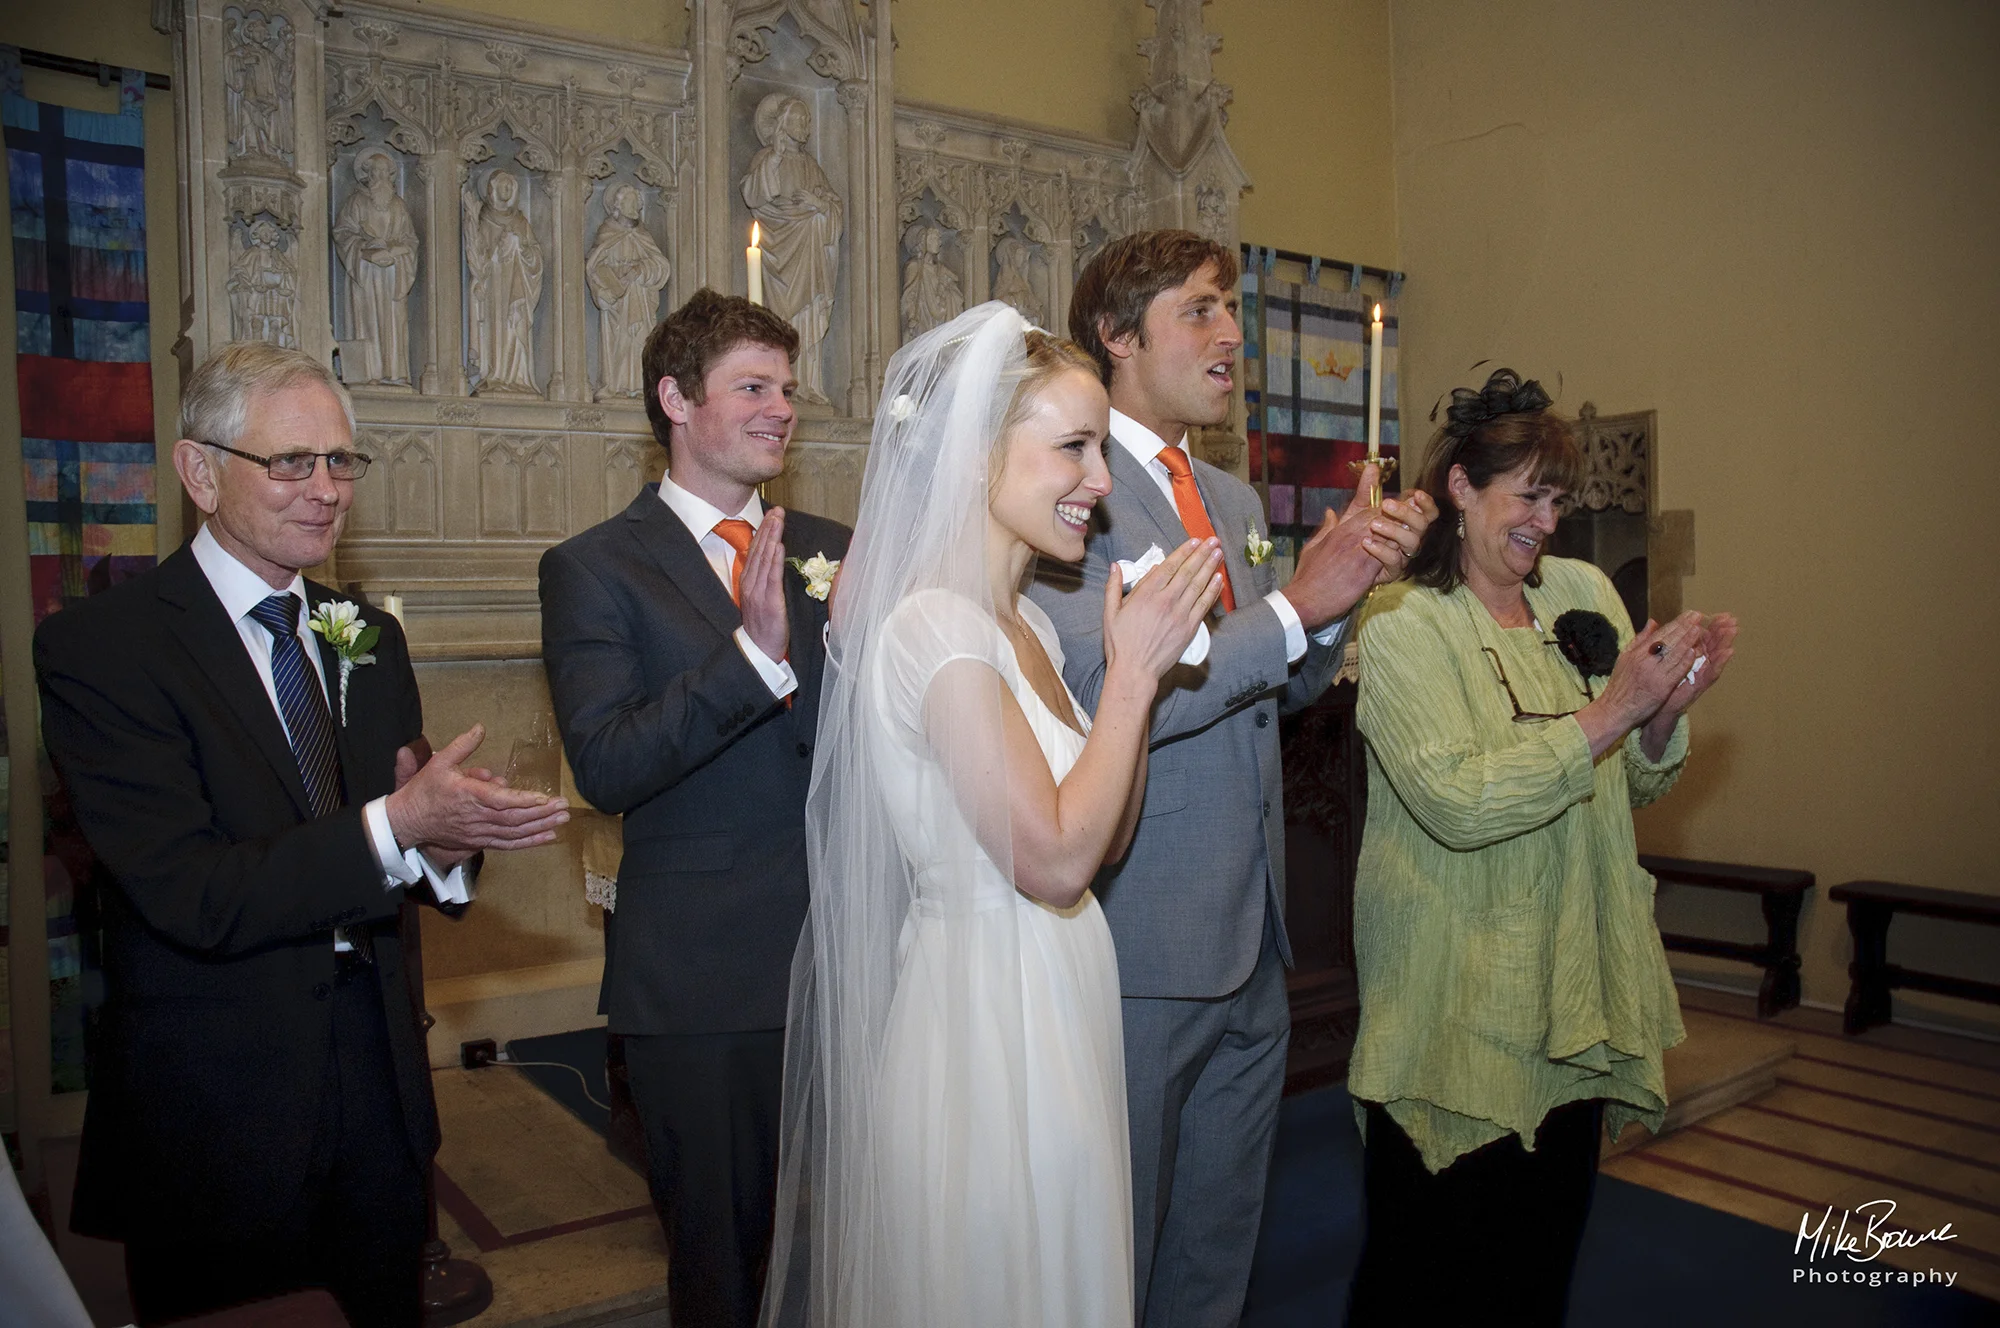 Newly married couple clap to applaud a friend who sang at their wedding